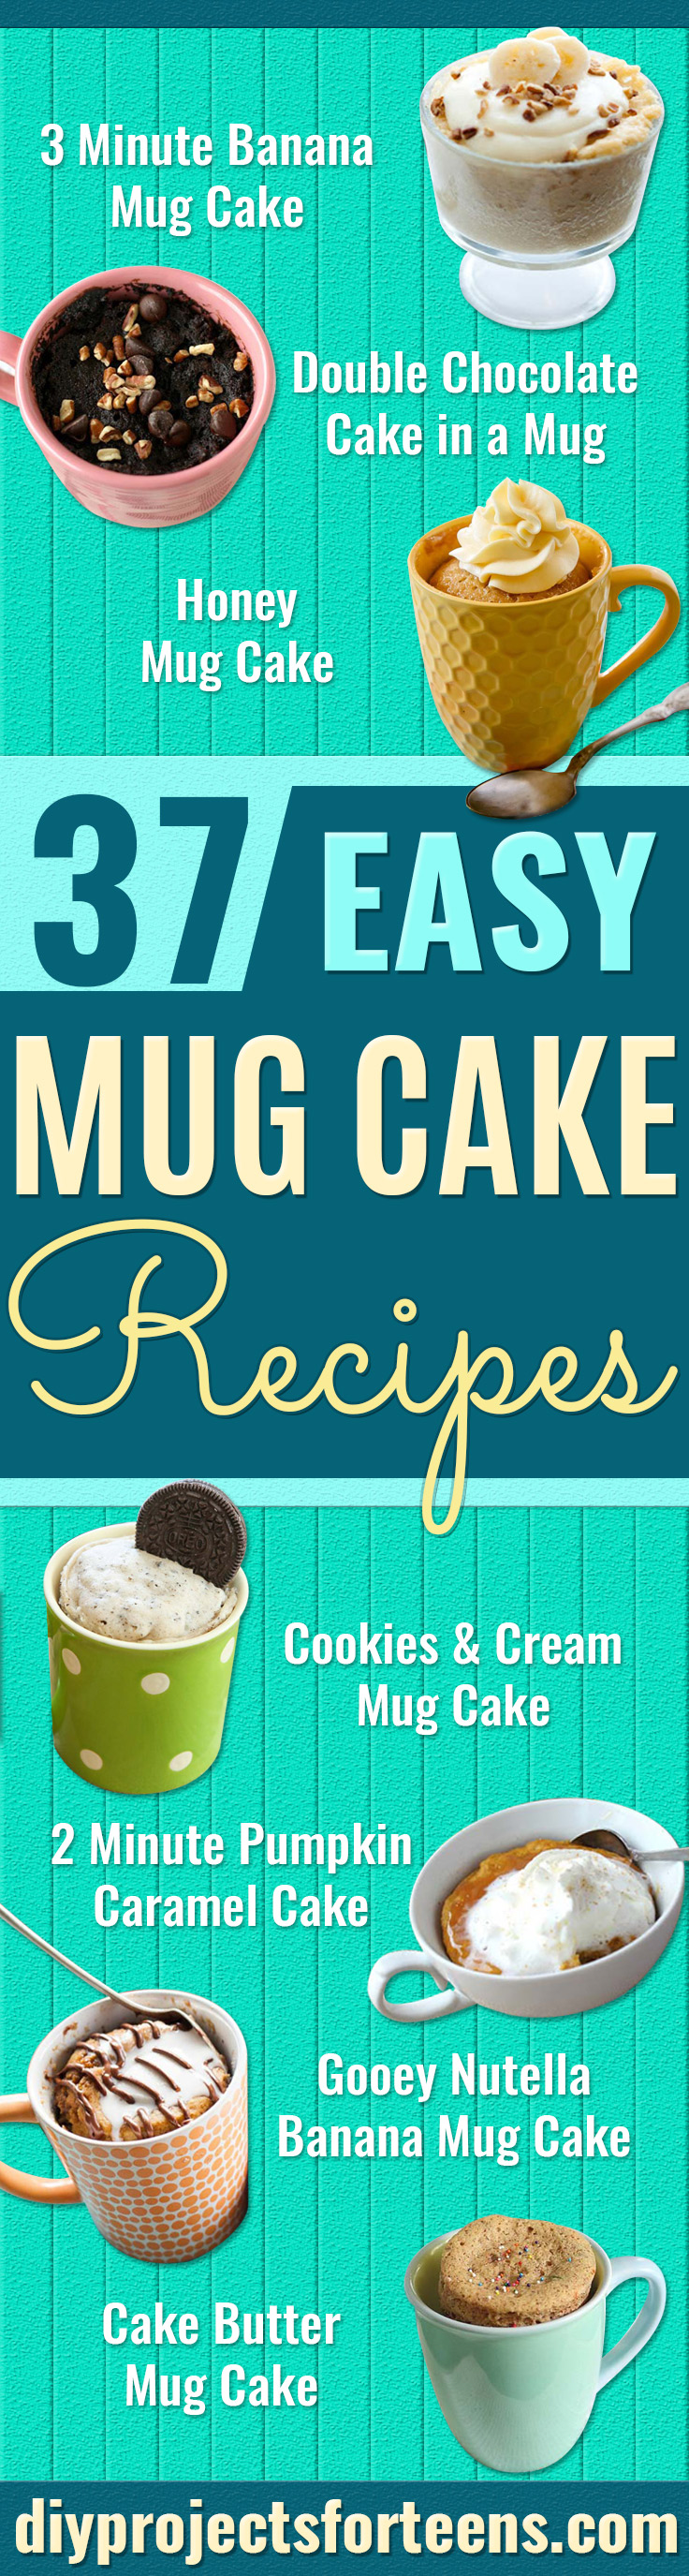 Easy Mug Cake Recipes - Best Microwave Cakes and Ideas for Baking Cake in The Microwave - Chocolate, Vanilla, Healthy, Snickerdoodle, Peanut Butter, Brownie and Nutella - Step by Step Tutorials and Instructions - Best DIY Projects and Recipes for Teens and Teenagers 